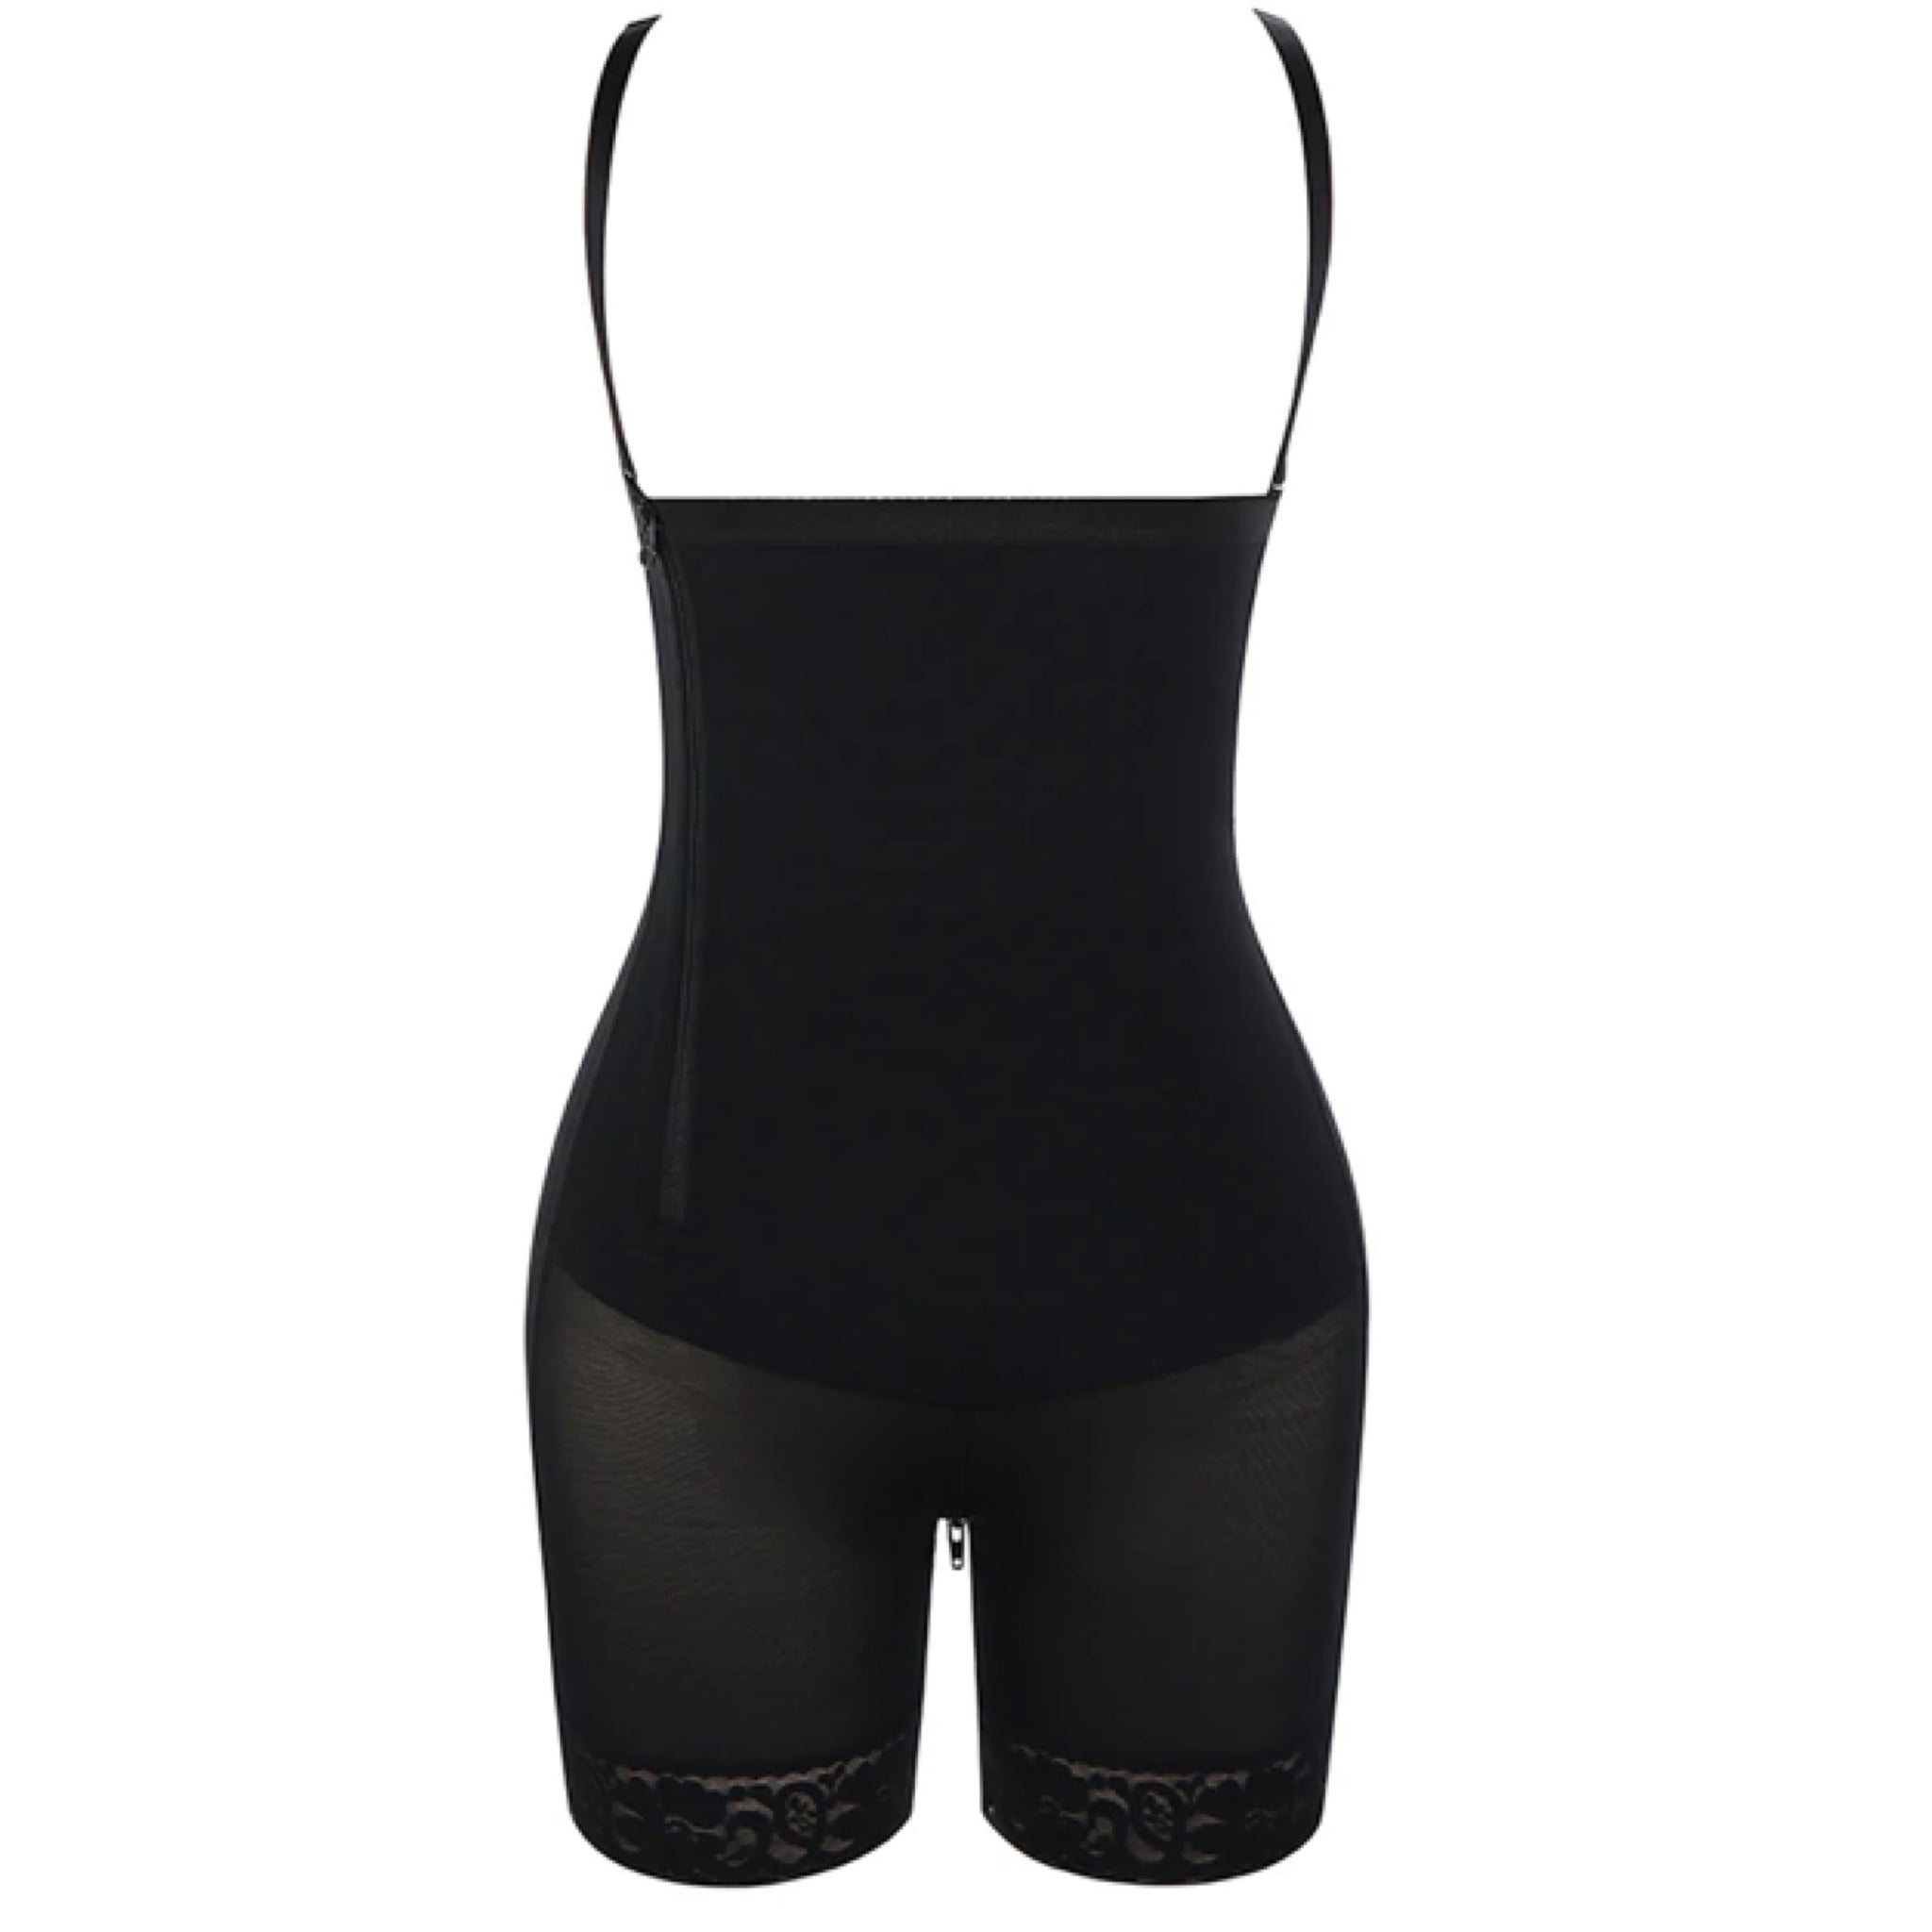 SHAPEWEARS/FAJAS/WAIST TRAINERS on Instagram: You can compress on the go  because it's barely there under clothes and very flattering. Sizes S-6XL in  Black and Nude Price:S-3xl N55,000 4xl-6xl-60,000 : #shapewear #bodygoals  #waisttraining #